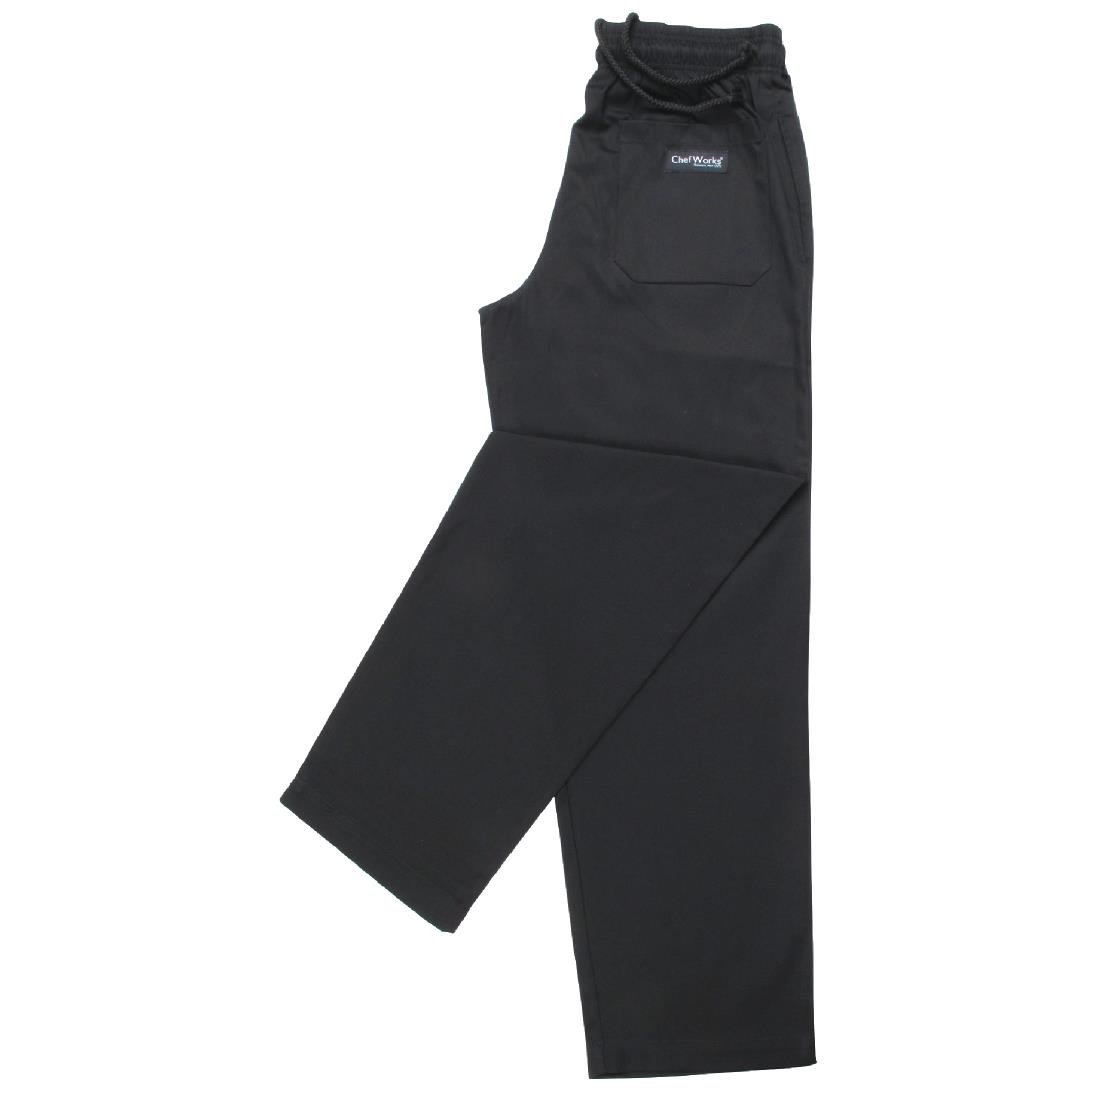 A029-6XL Chef Works Essential Baggy Trousers Black 6XL